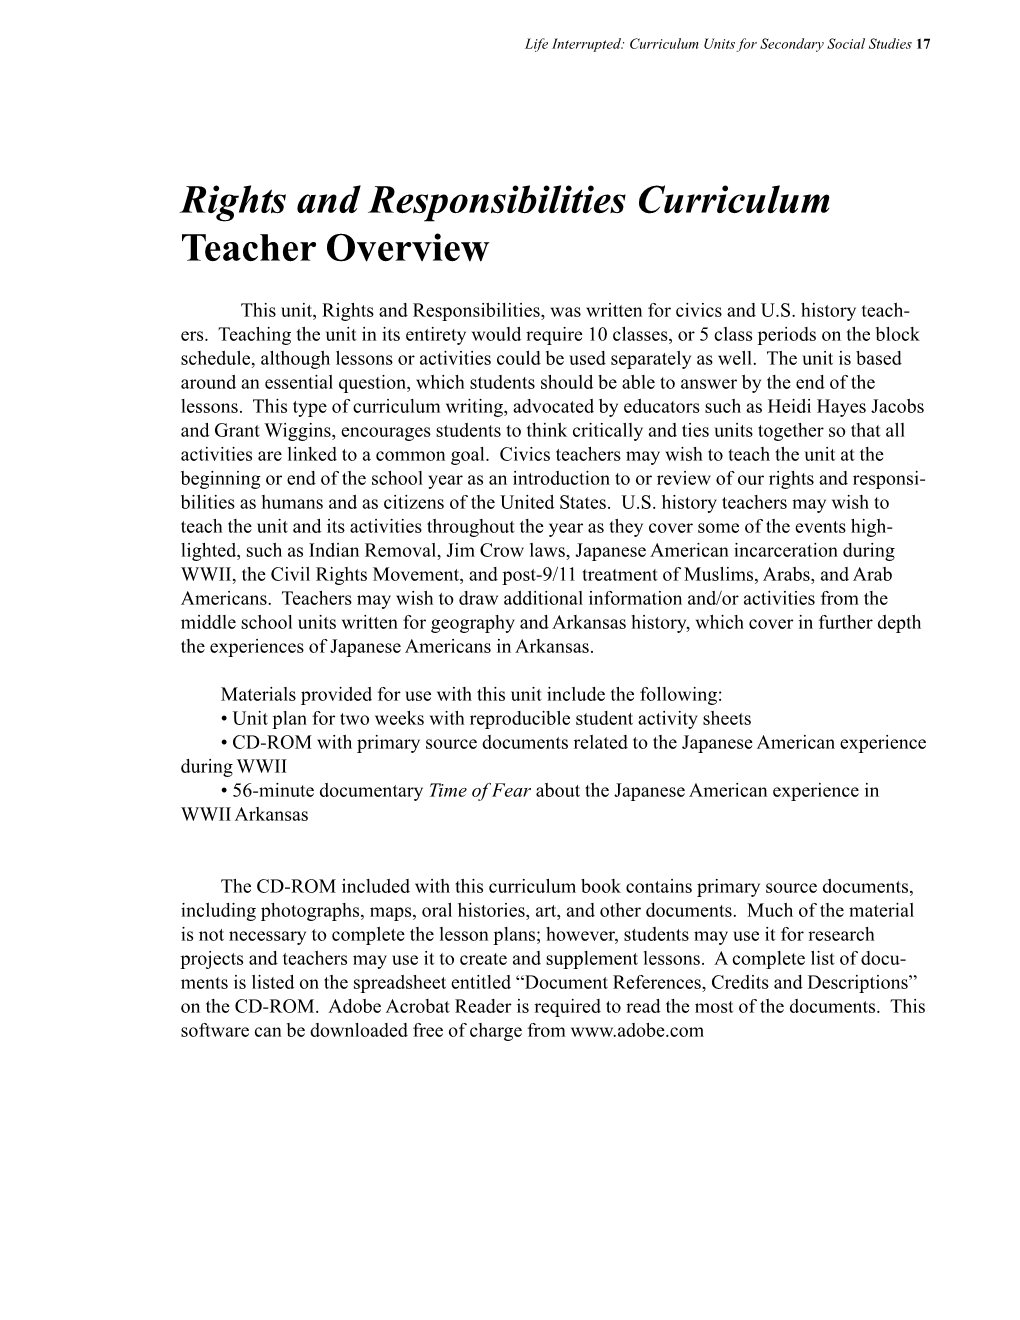 Download the Entire Rights and Responsibilities Curriculum (PDF)